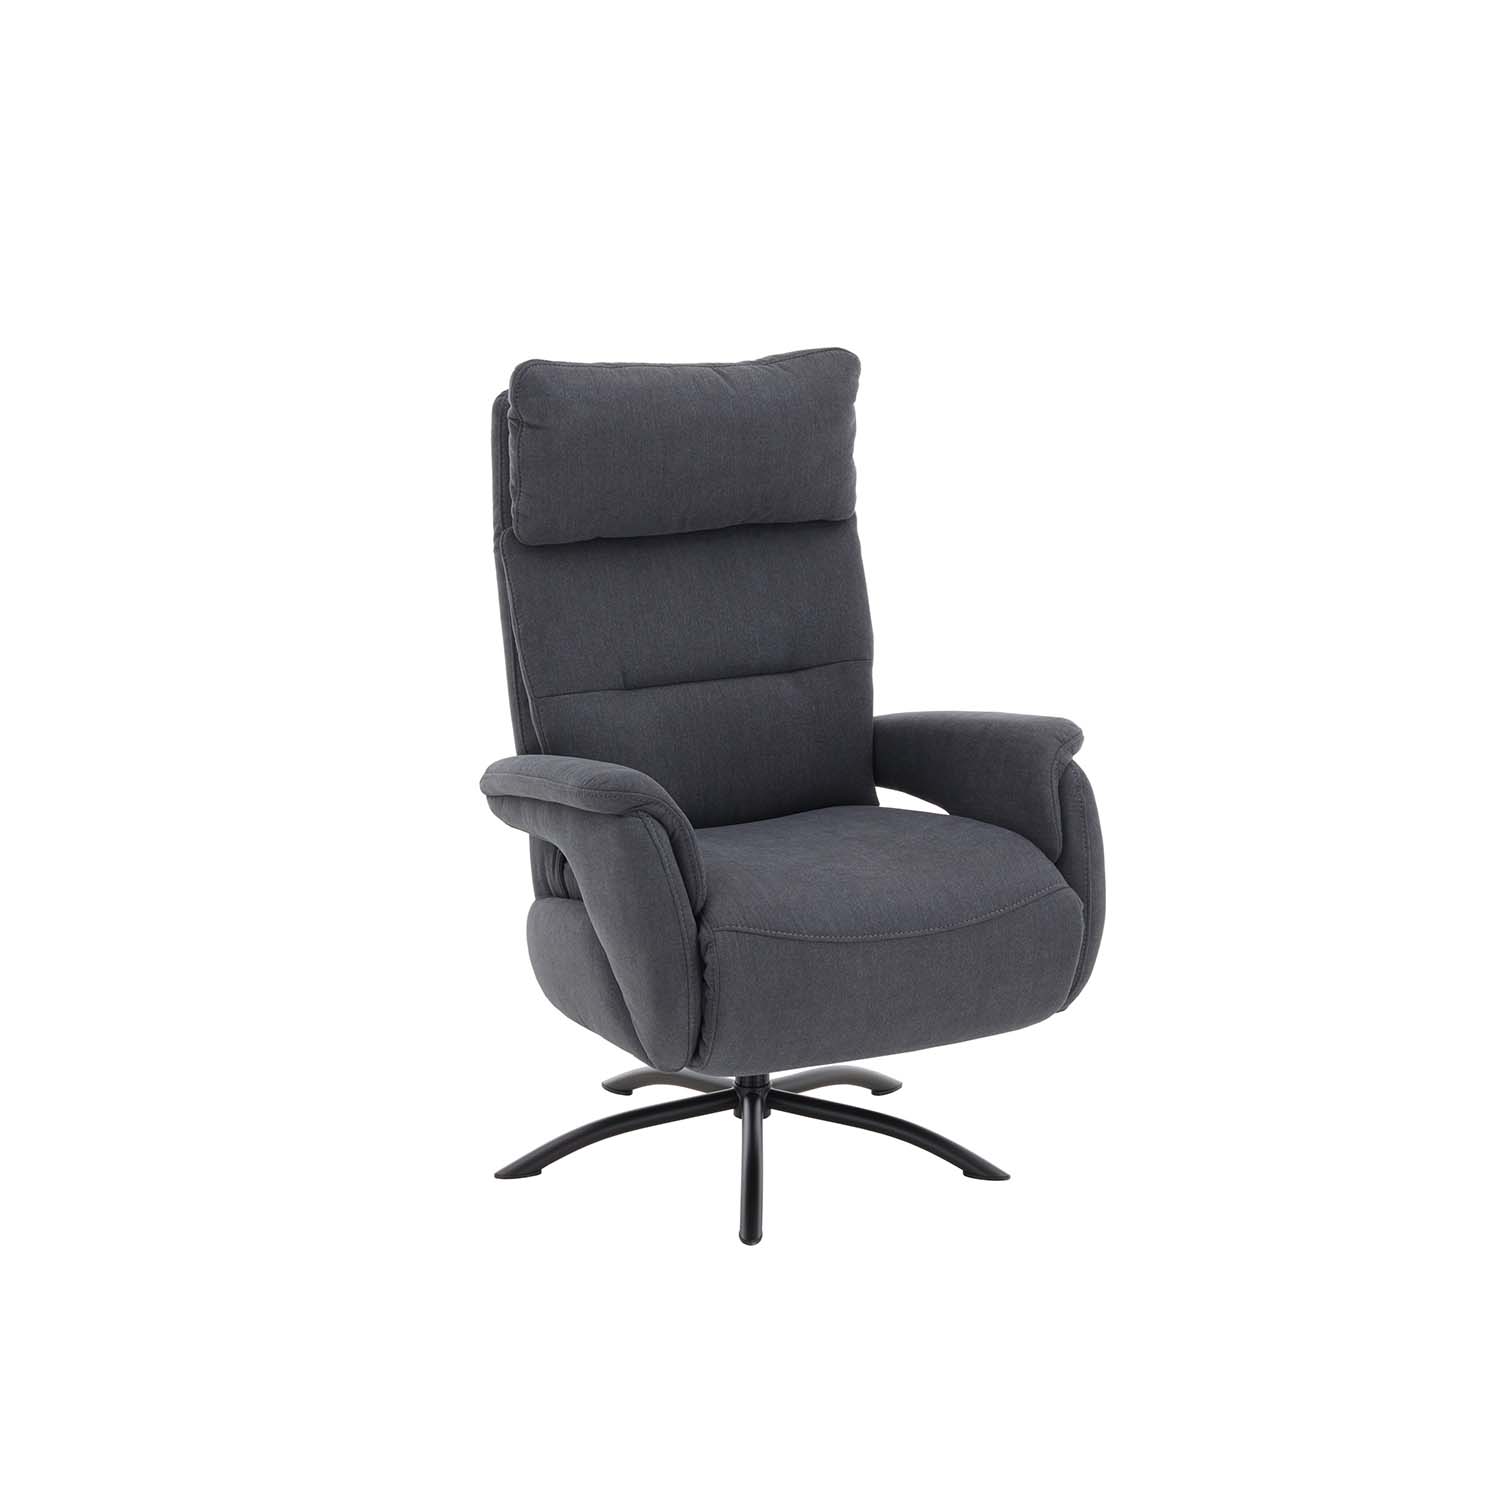 Orthosedis 2.0 Lounge RelaXX Sessel